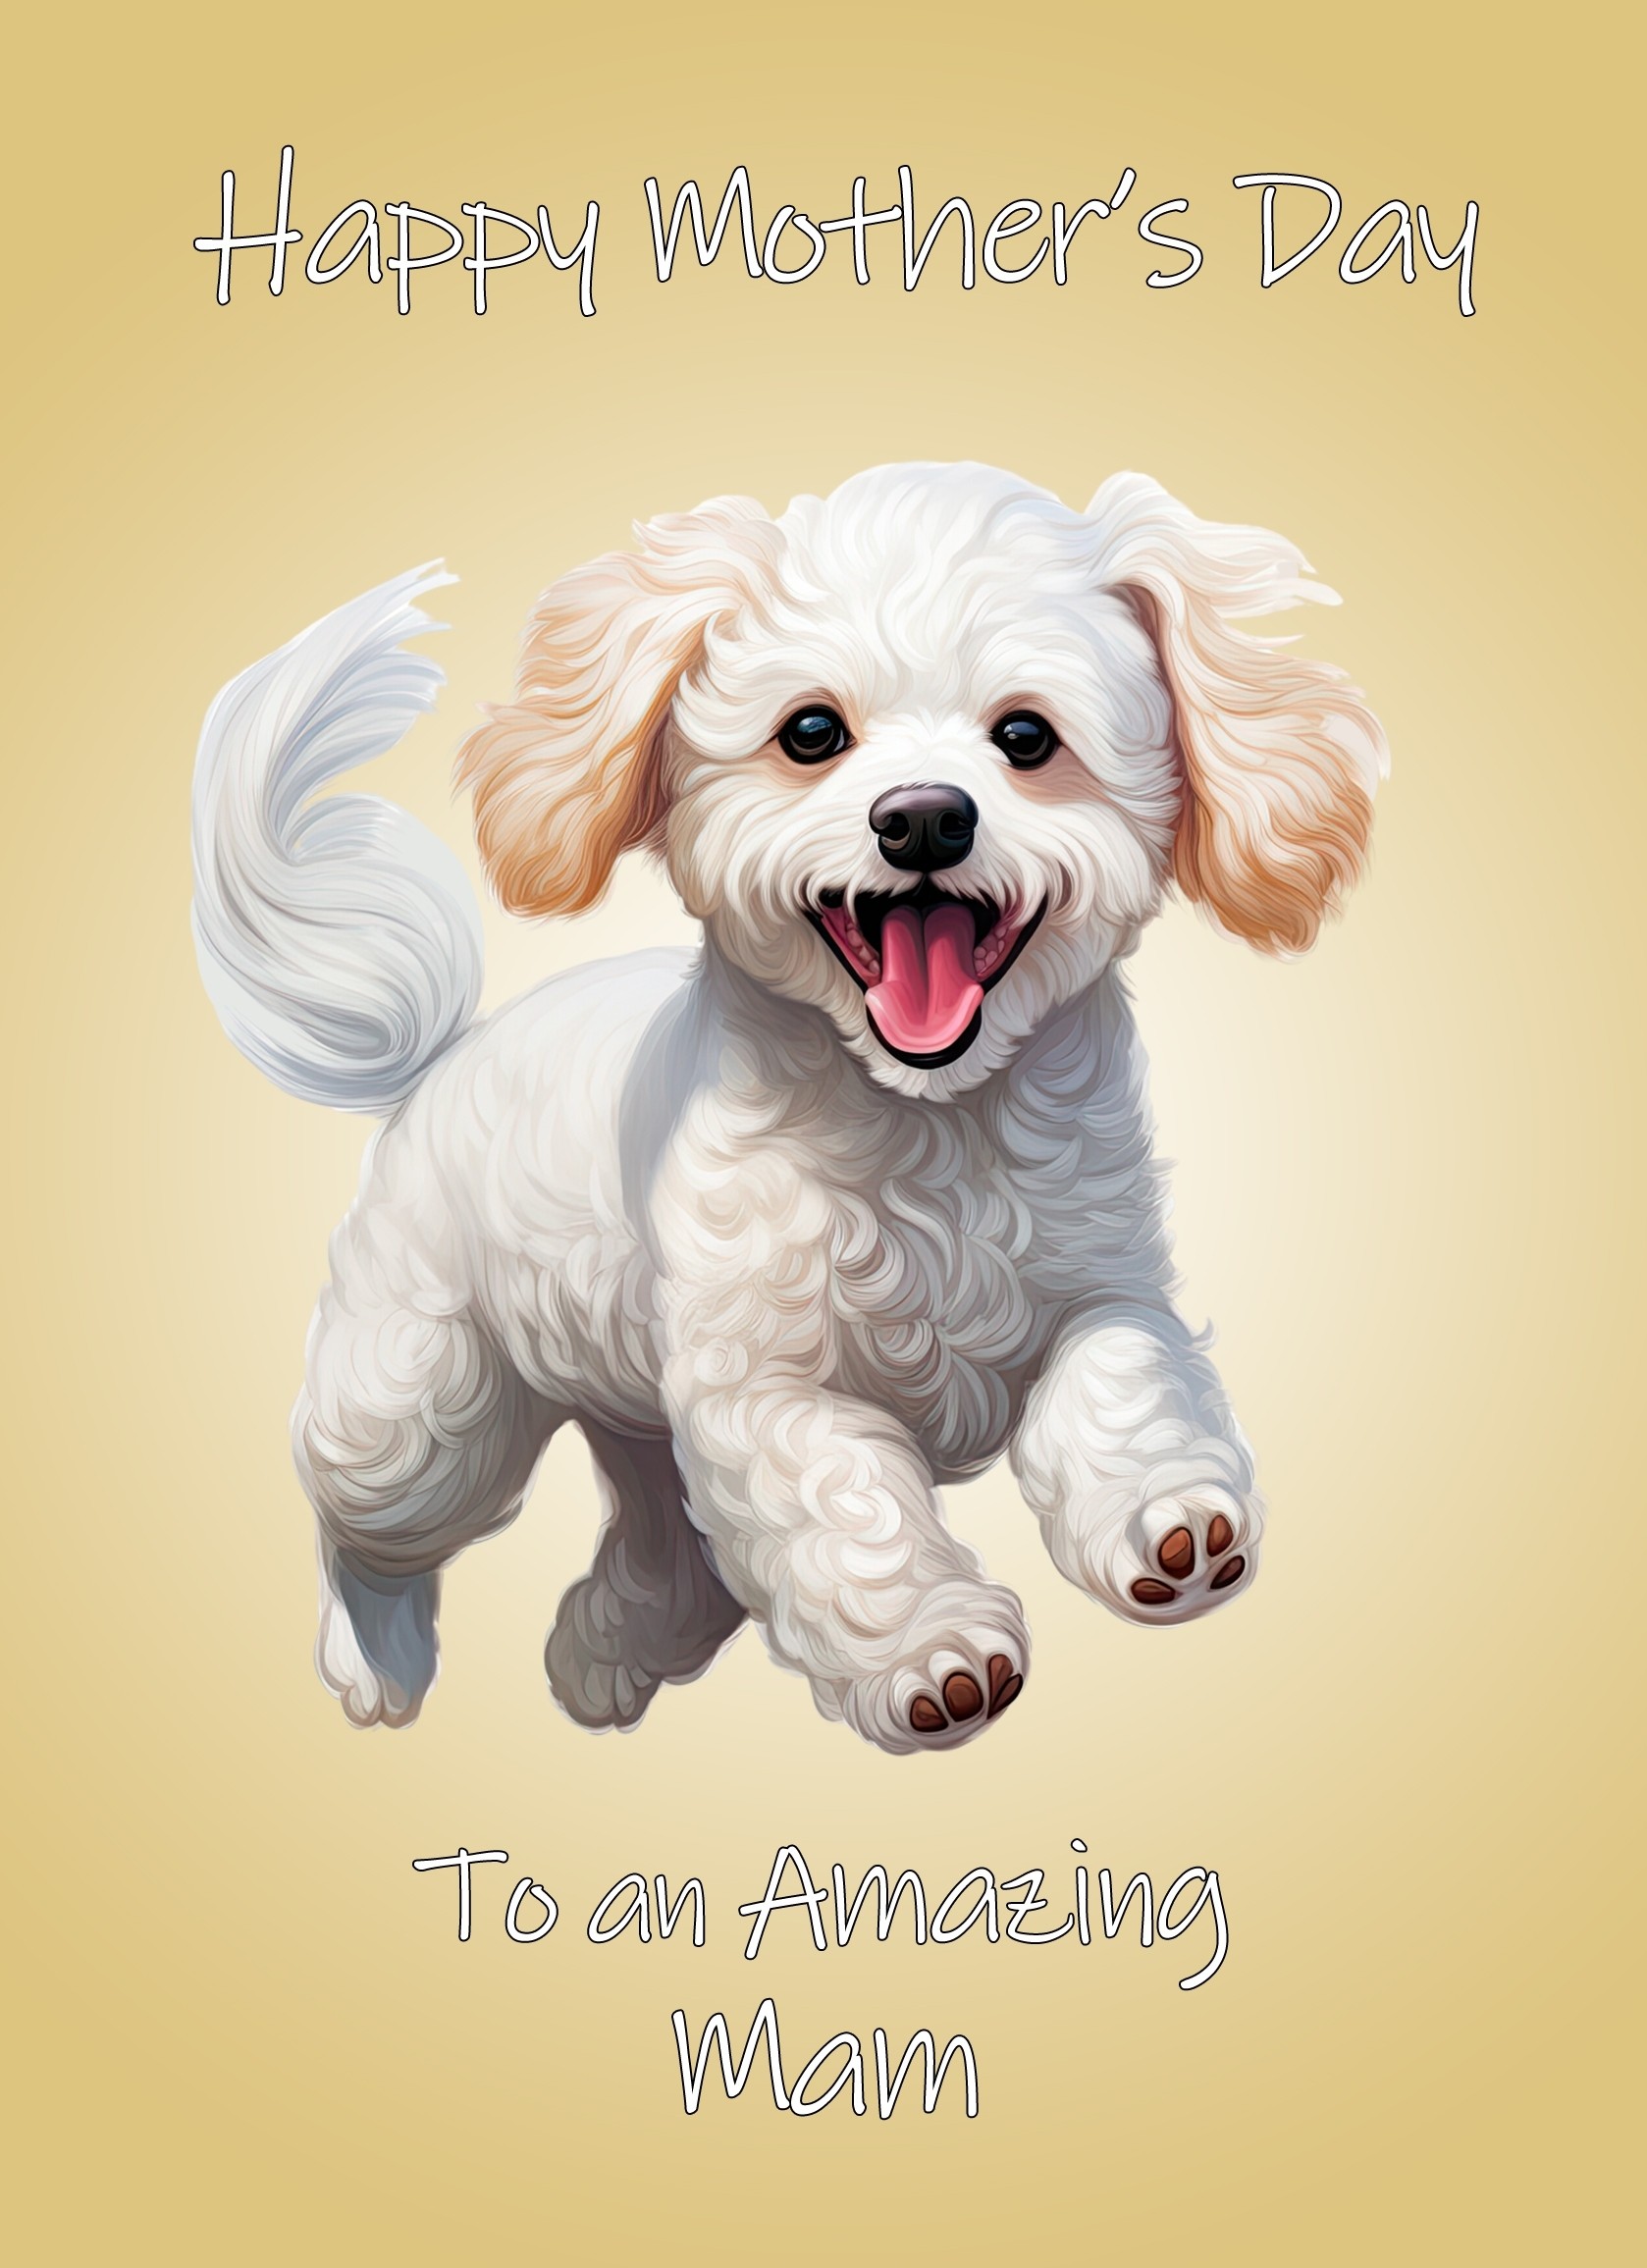 Poodle Dog Mothers Day Card For Mam